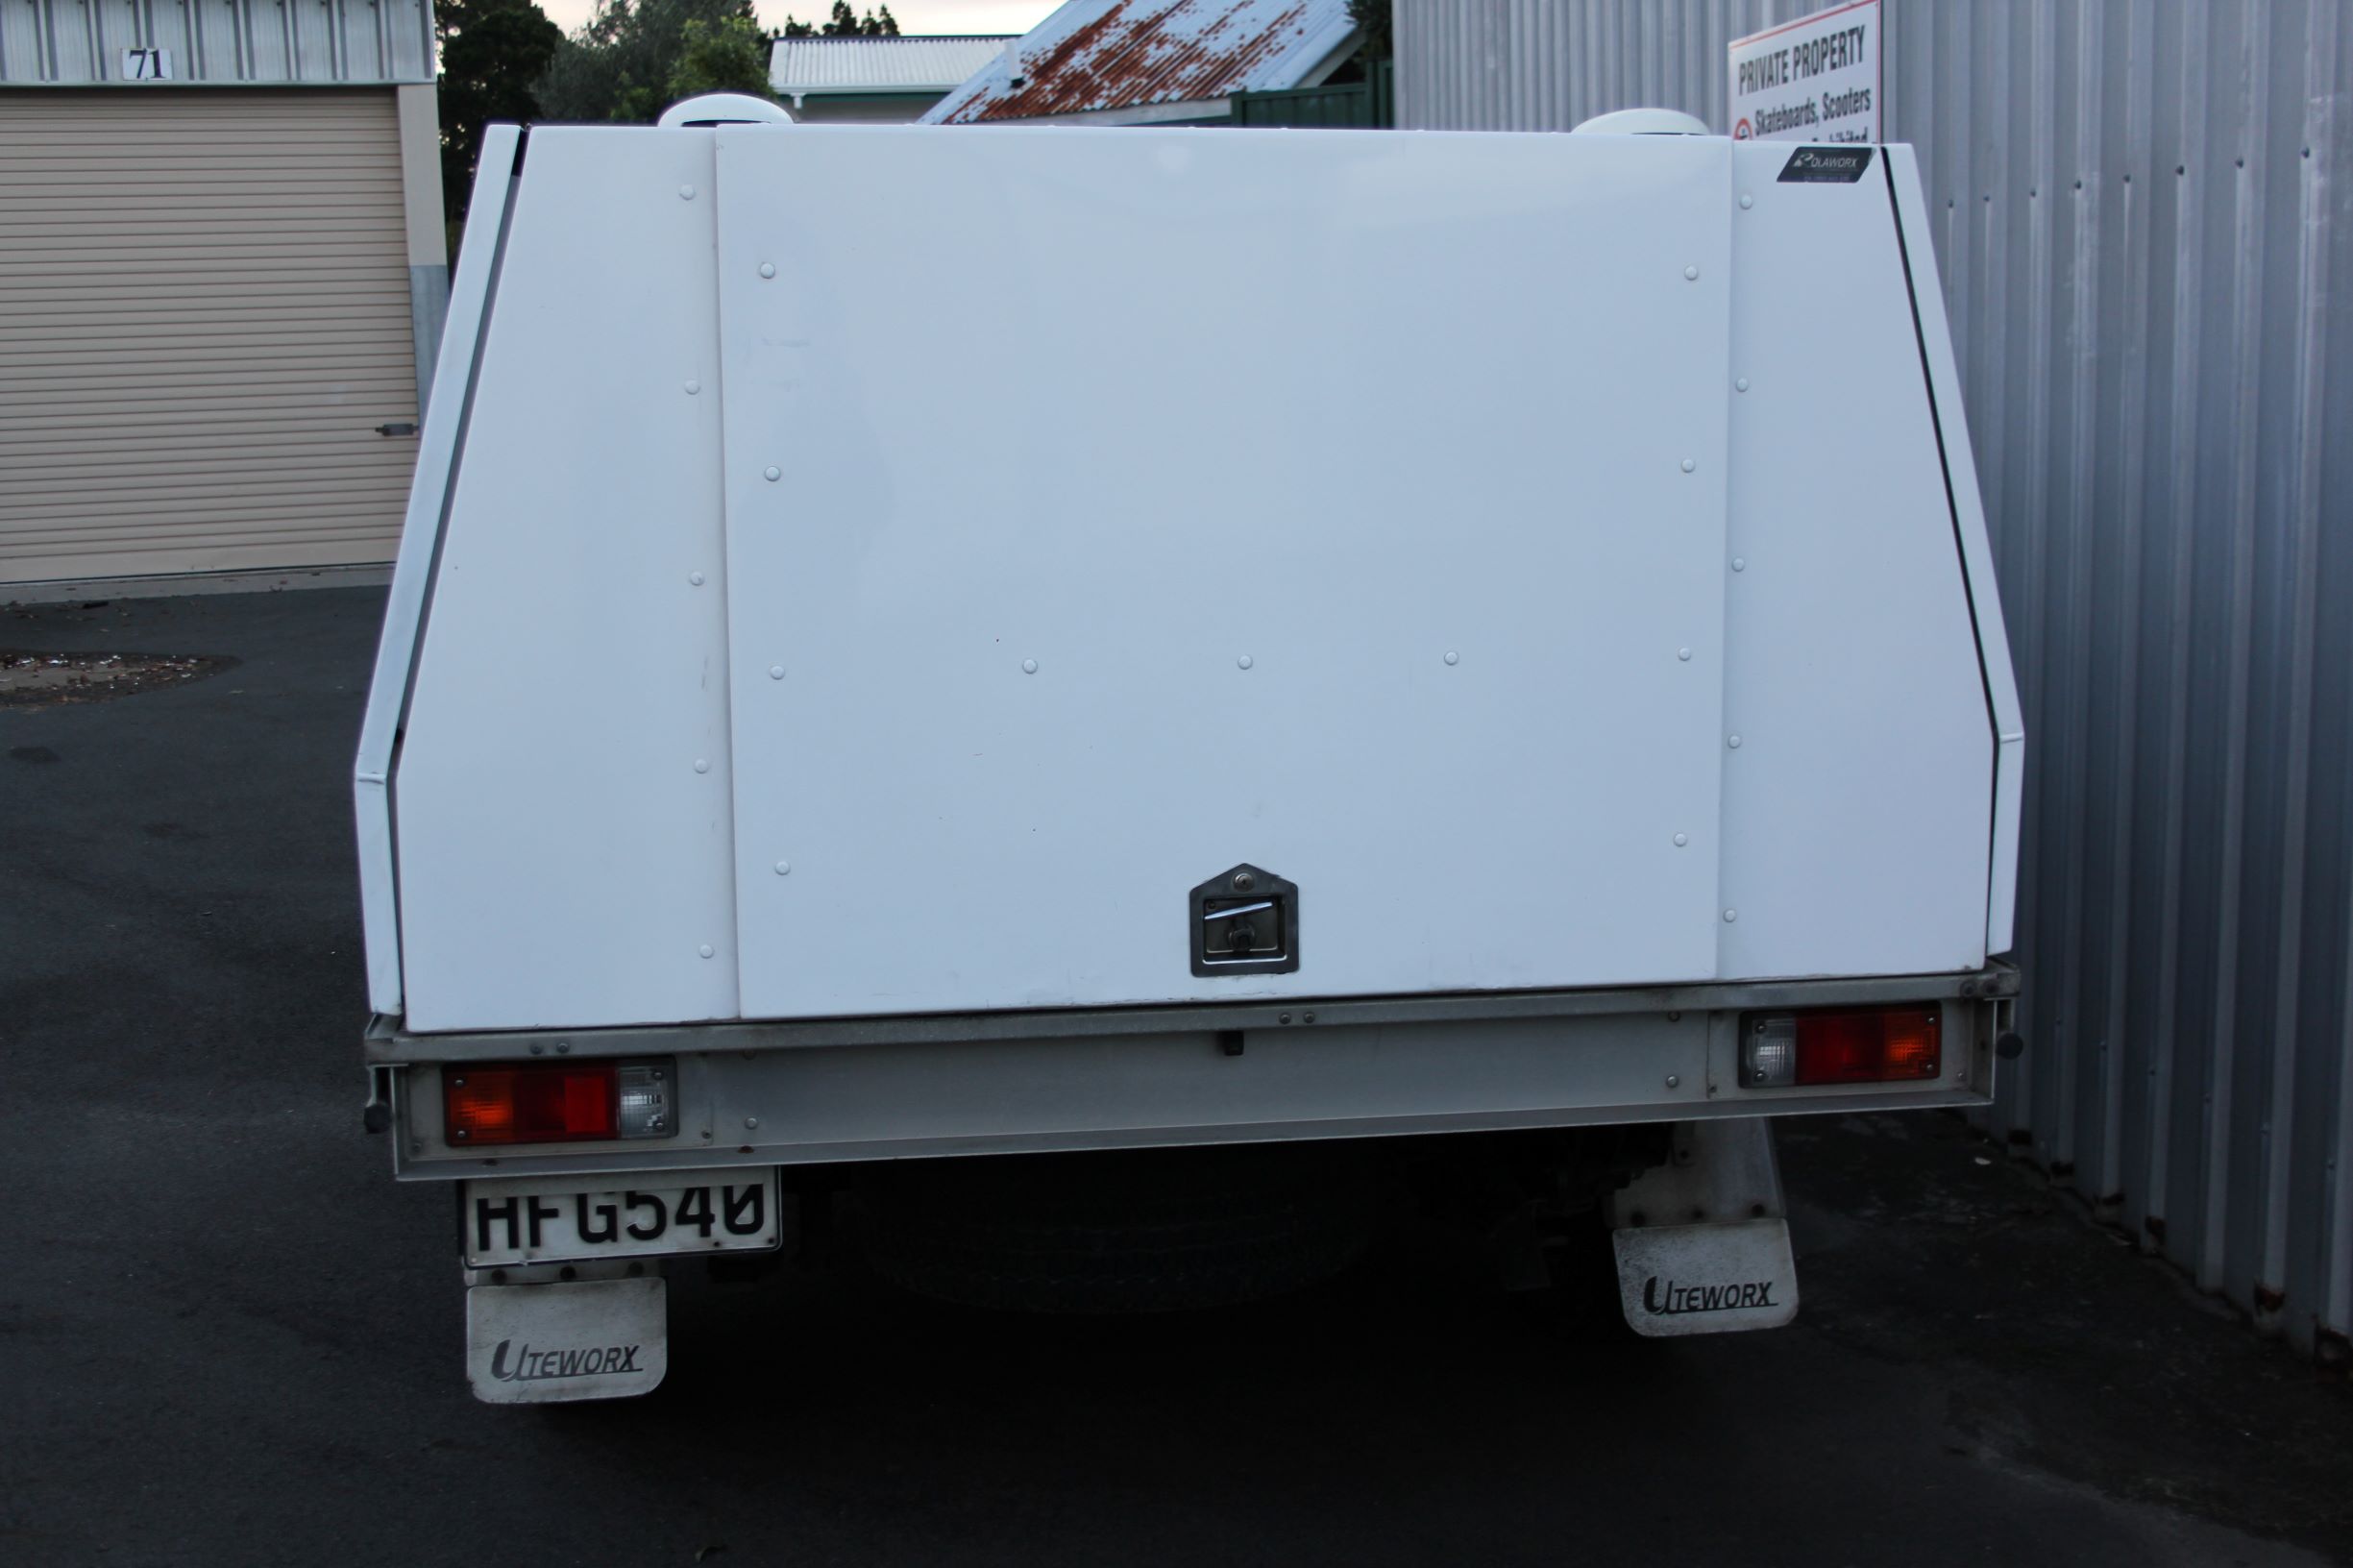 Ford Ranger toolbox body 2013 for sale in Auckland